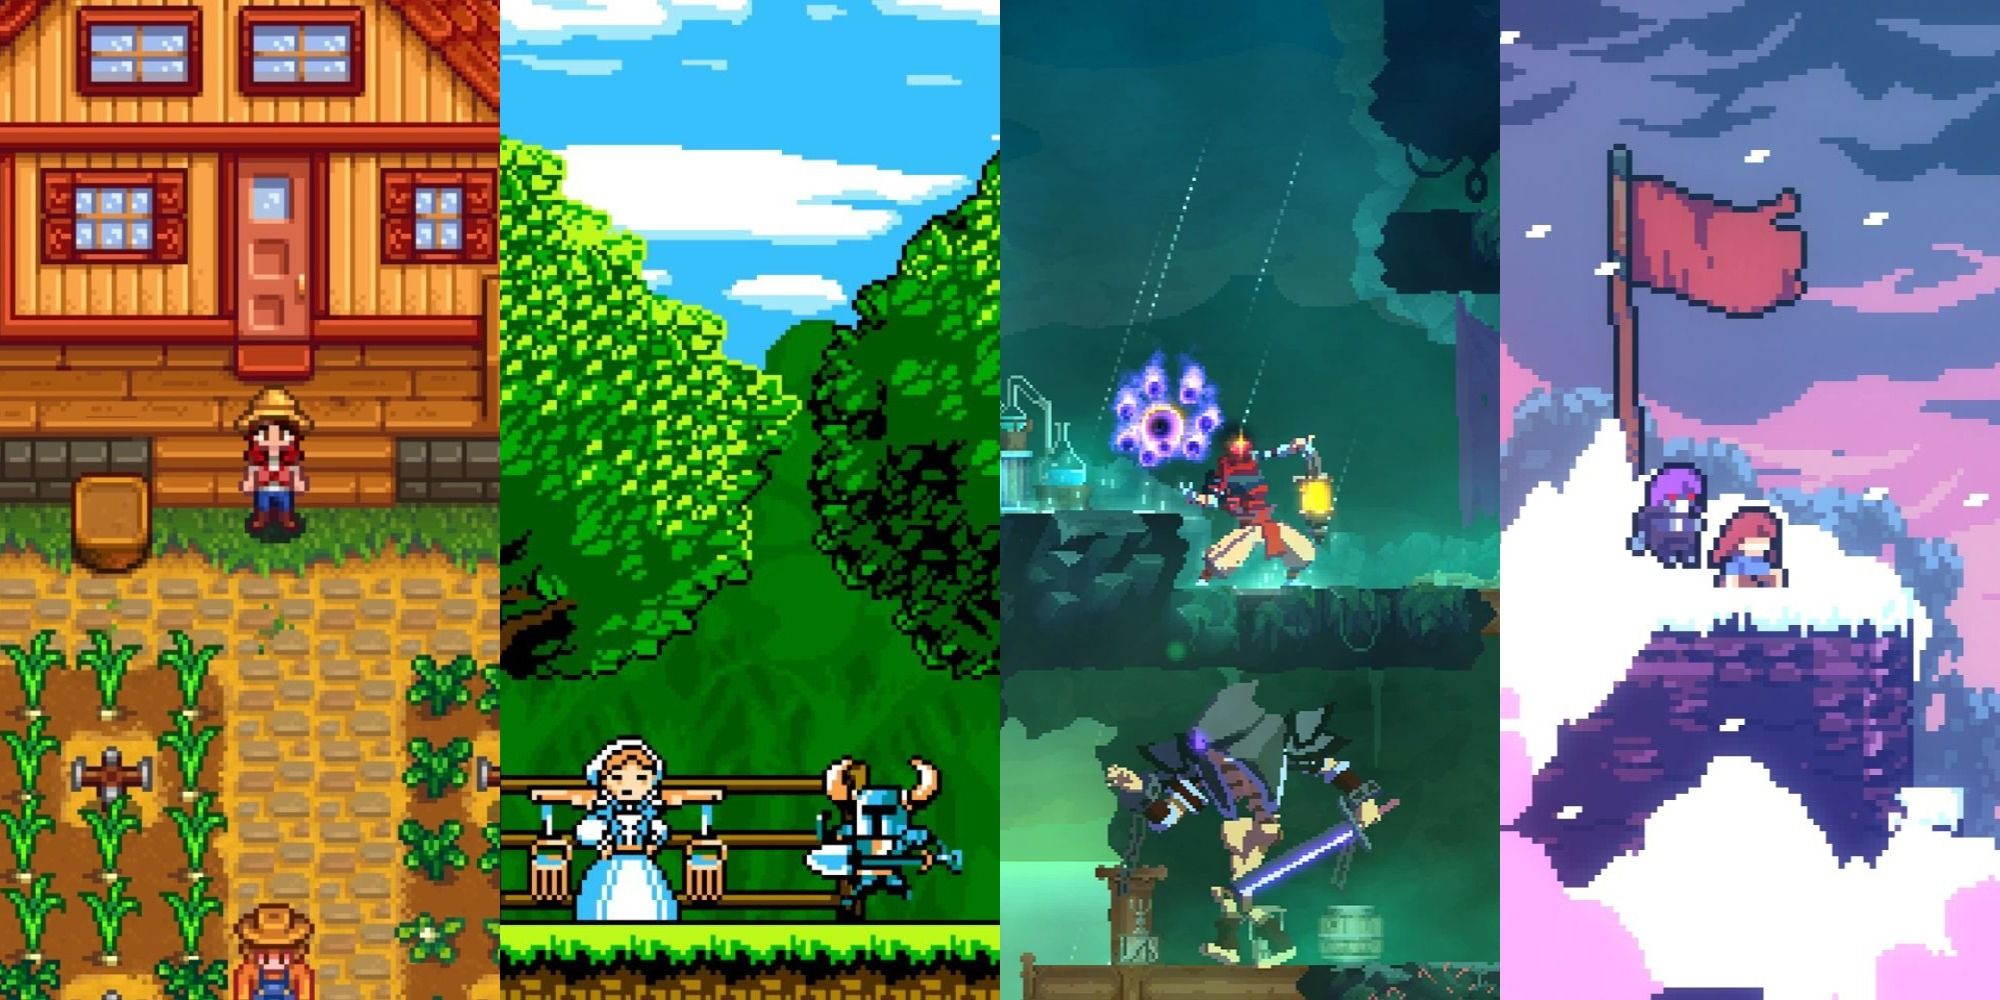 Combined Images From The Games Stardew Valley Shovel Knight Dead Cells And Celeste 